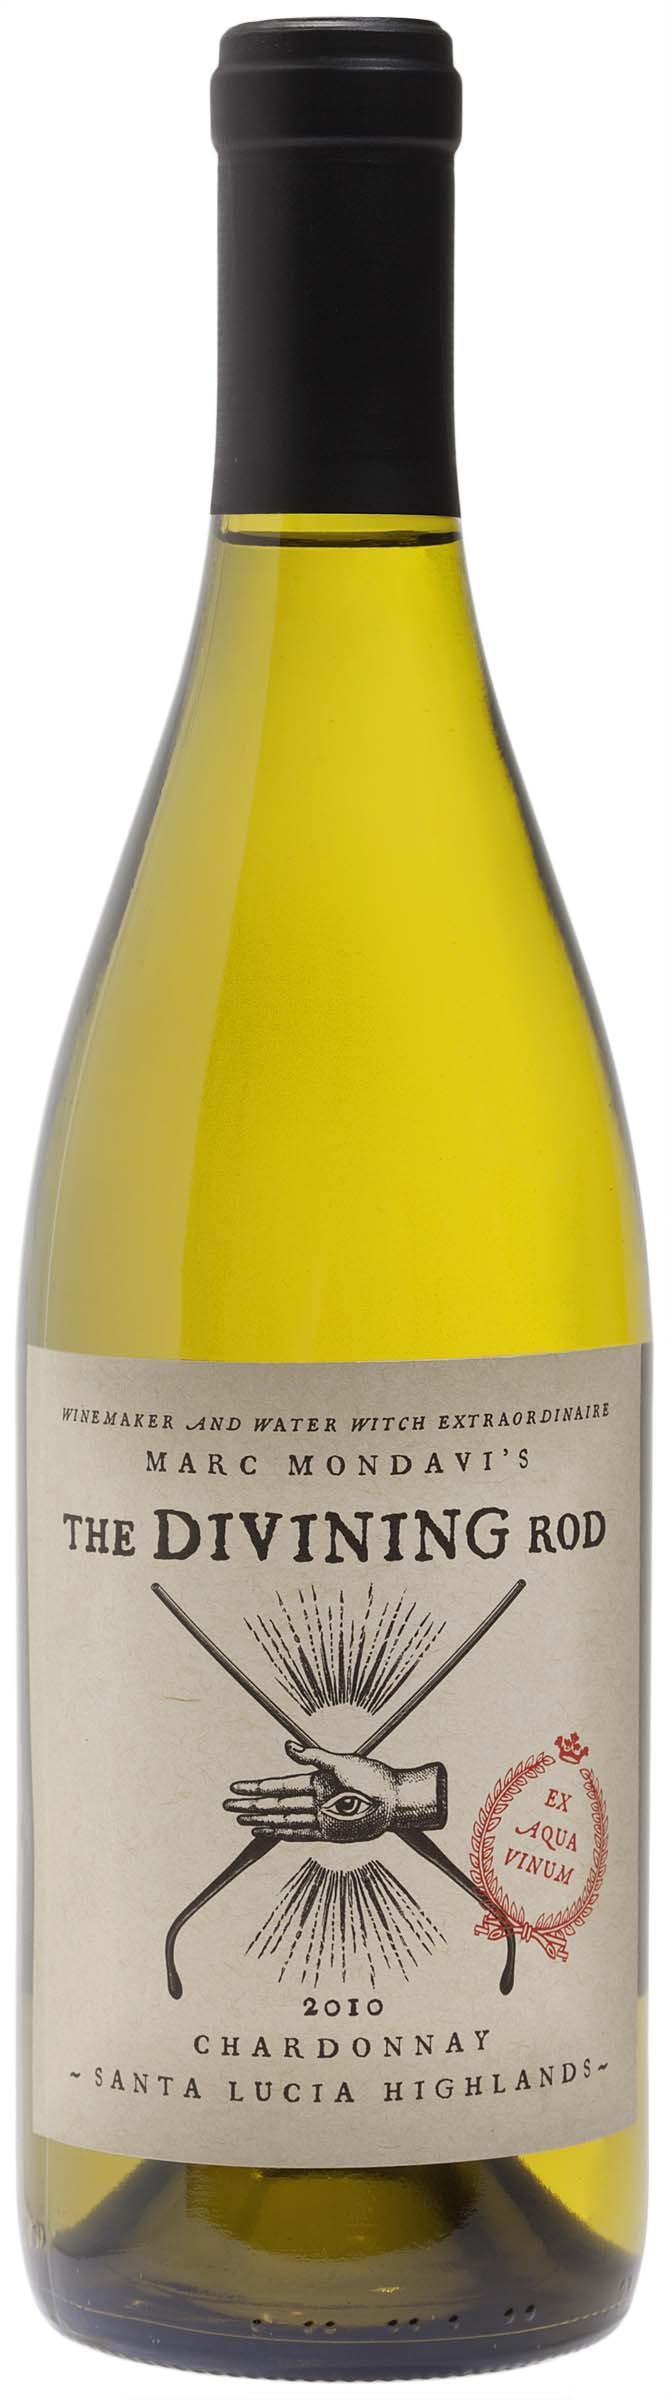 The Divining Rod Wines are owned an operated by C. Mondavi & Family, a family-owned business that has thrived for generations to produce fine wines for a variety of occasions and consumers.